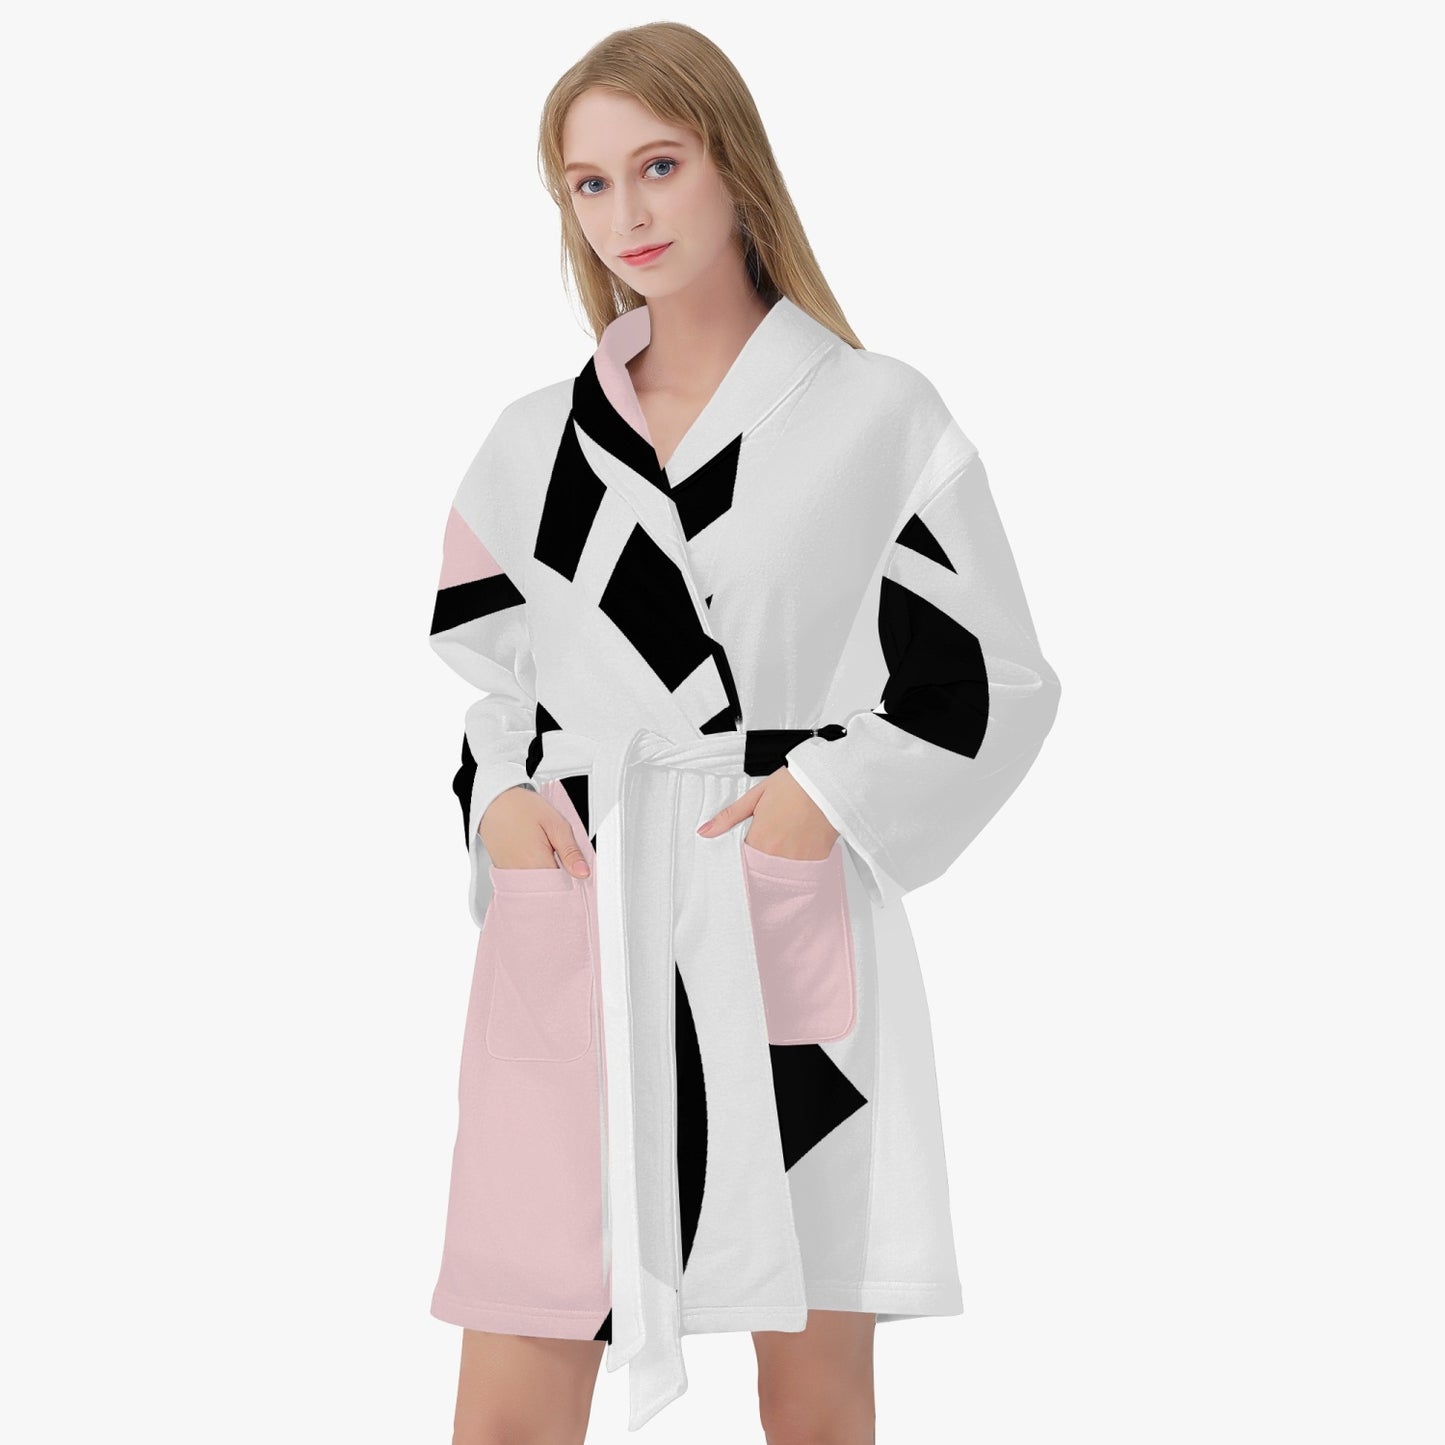 Loose-fitting Bathrobe, Gifts for her